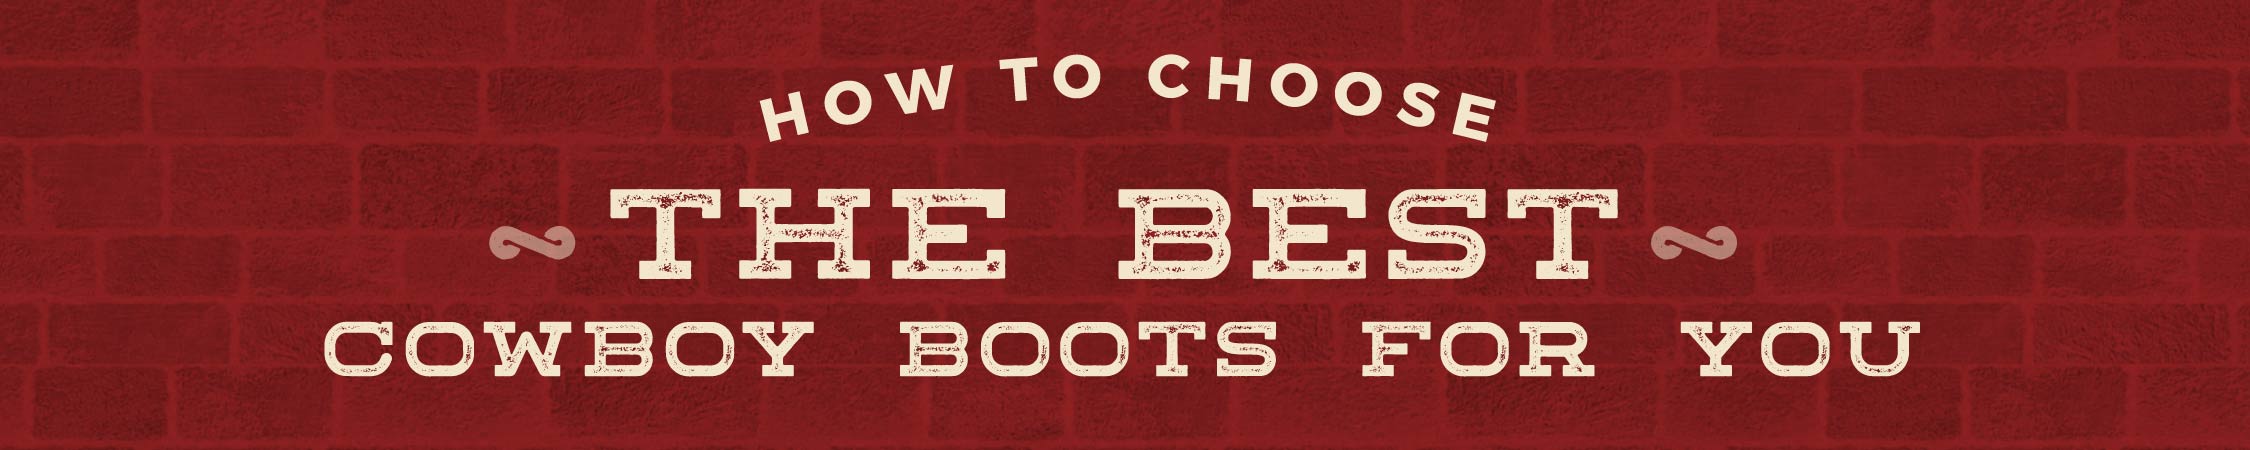 how to choose the best cowboy boots for you banner